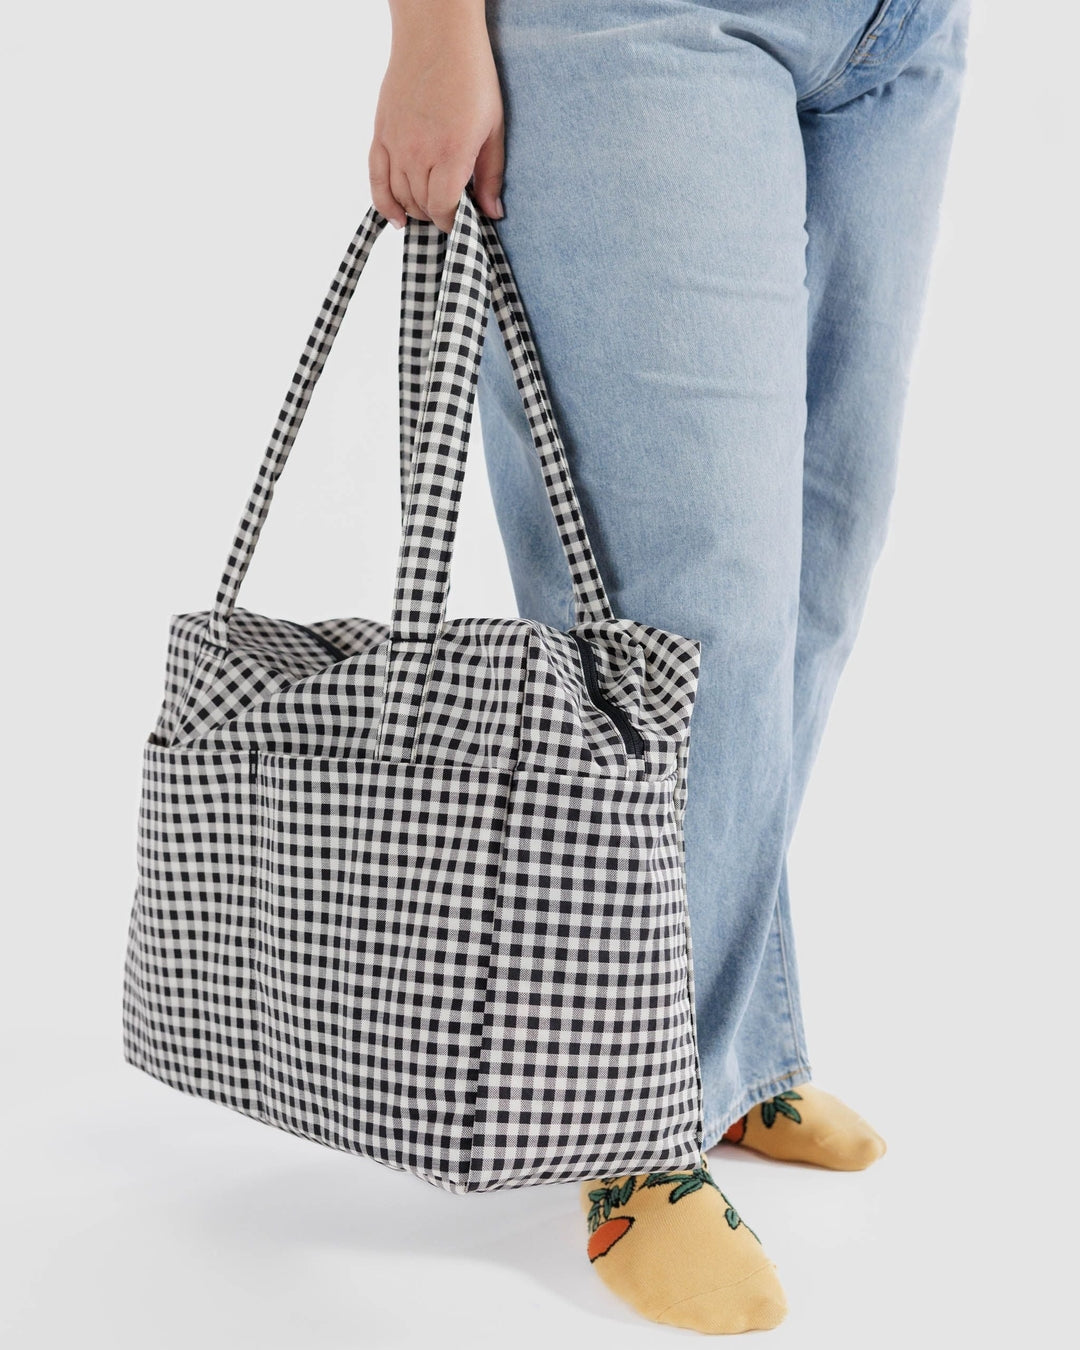 Cloud Carry-On Bag - Black & White Gingham